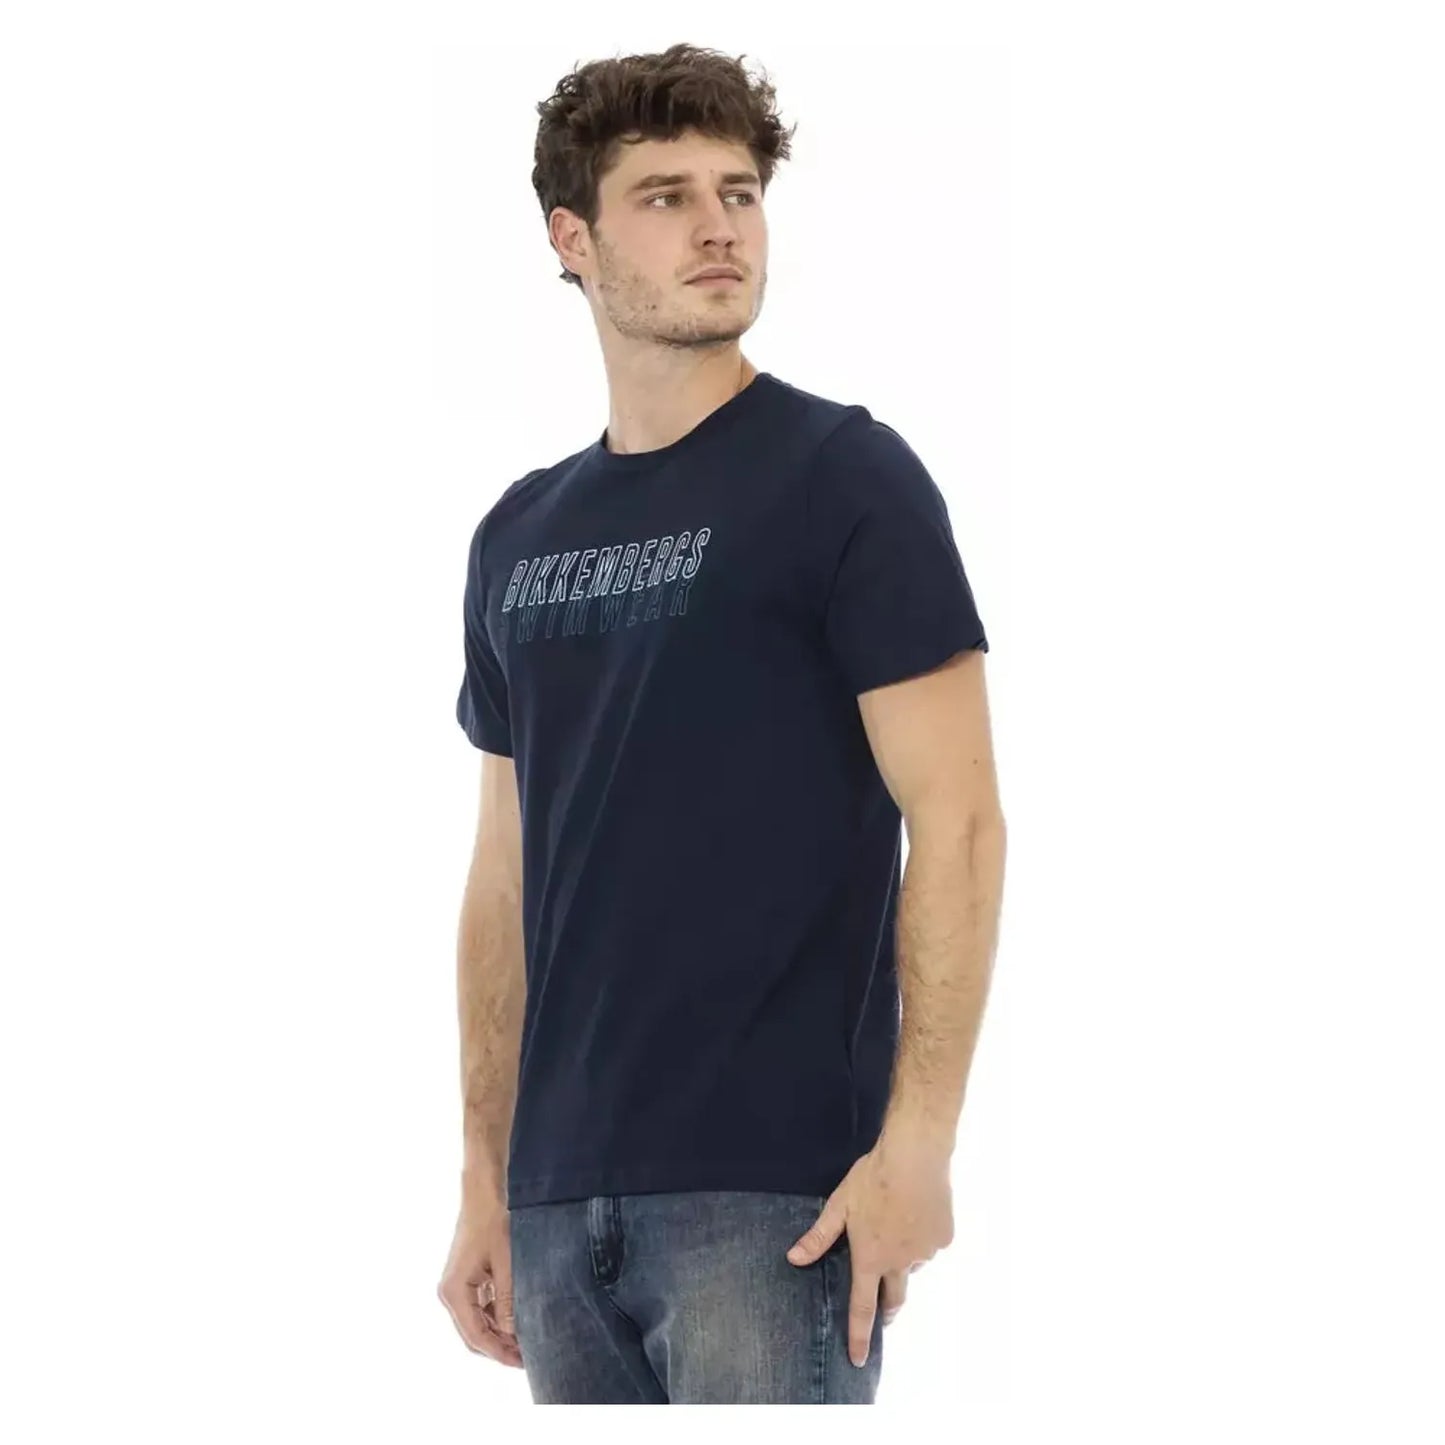 Bikkembergs Army Print Logo Tee in Pure Cotton blue-cotton-t-shirt-5